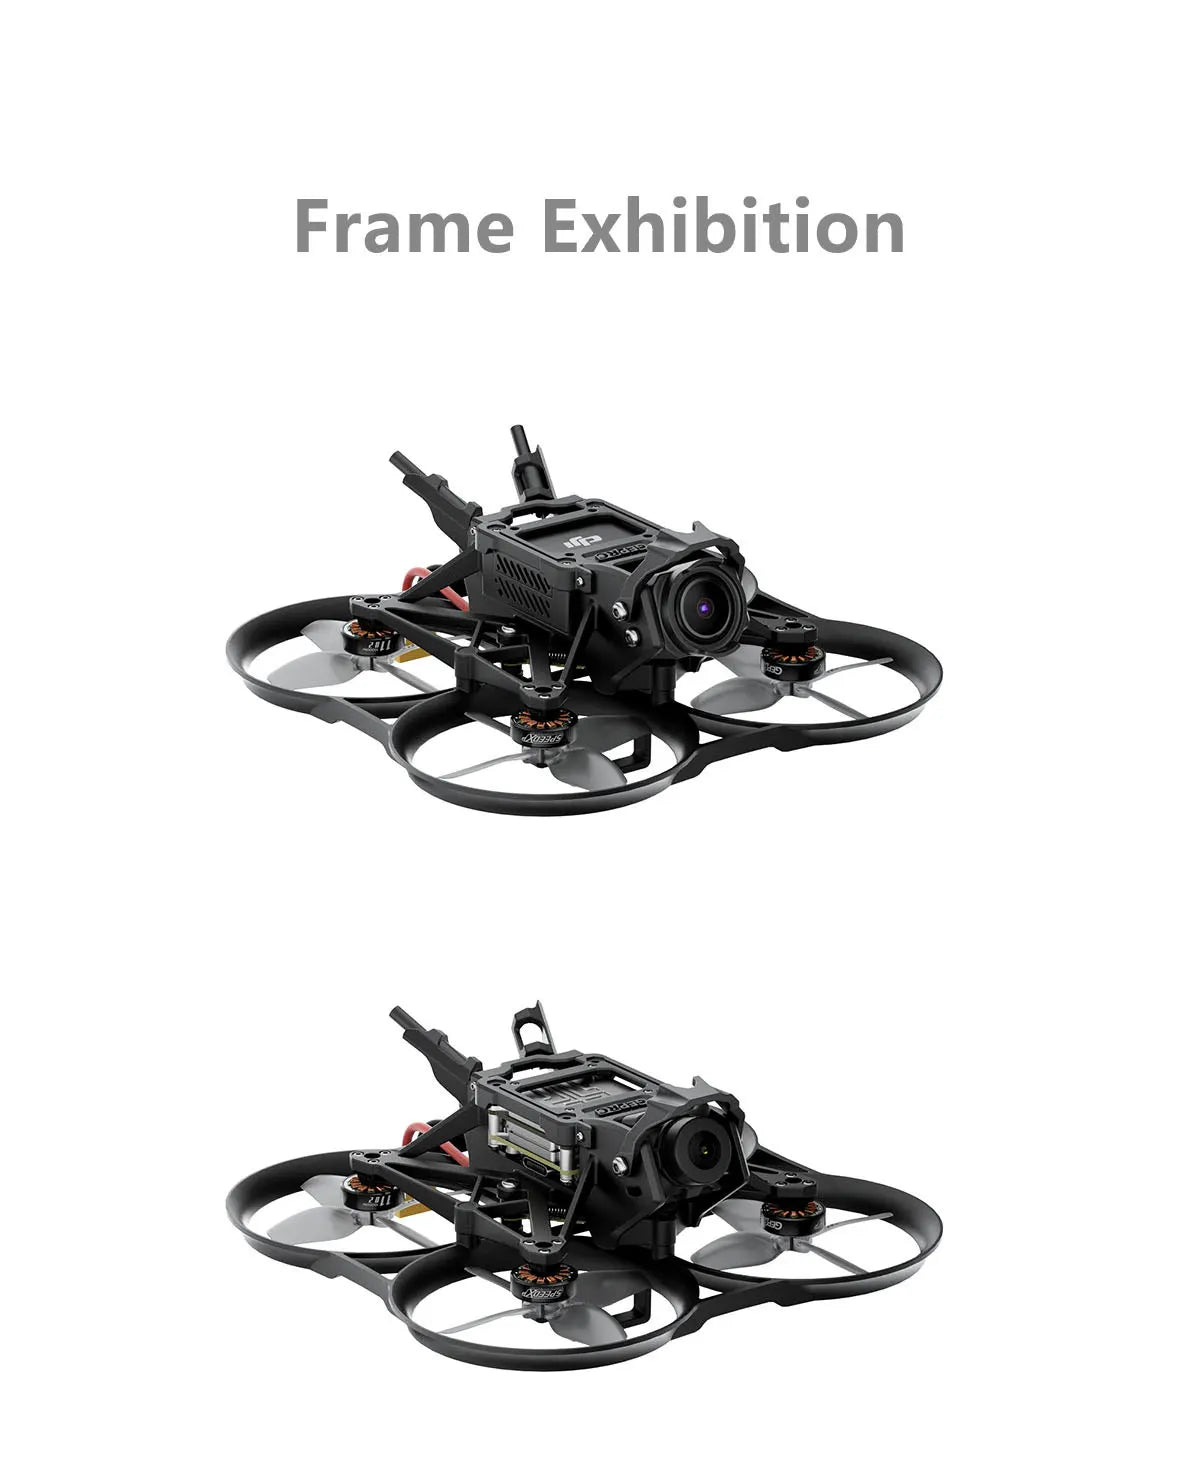 GEPRC DarkStar20 HD Wasp FPV, DarkStar20 is a good solution when conventional size quadcopters are unable to meet